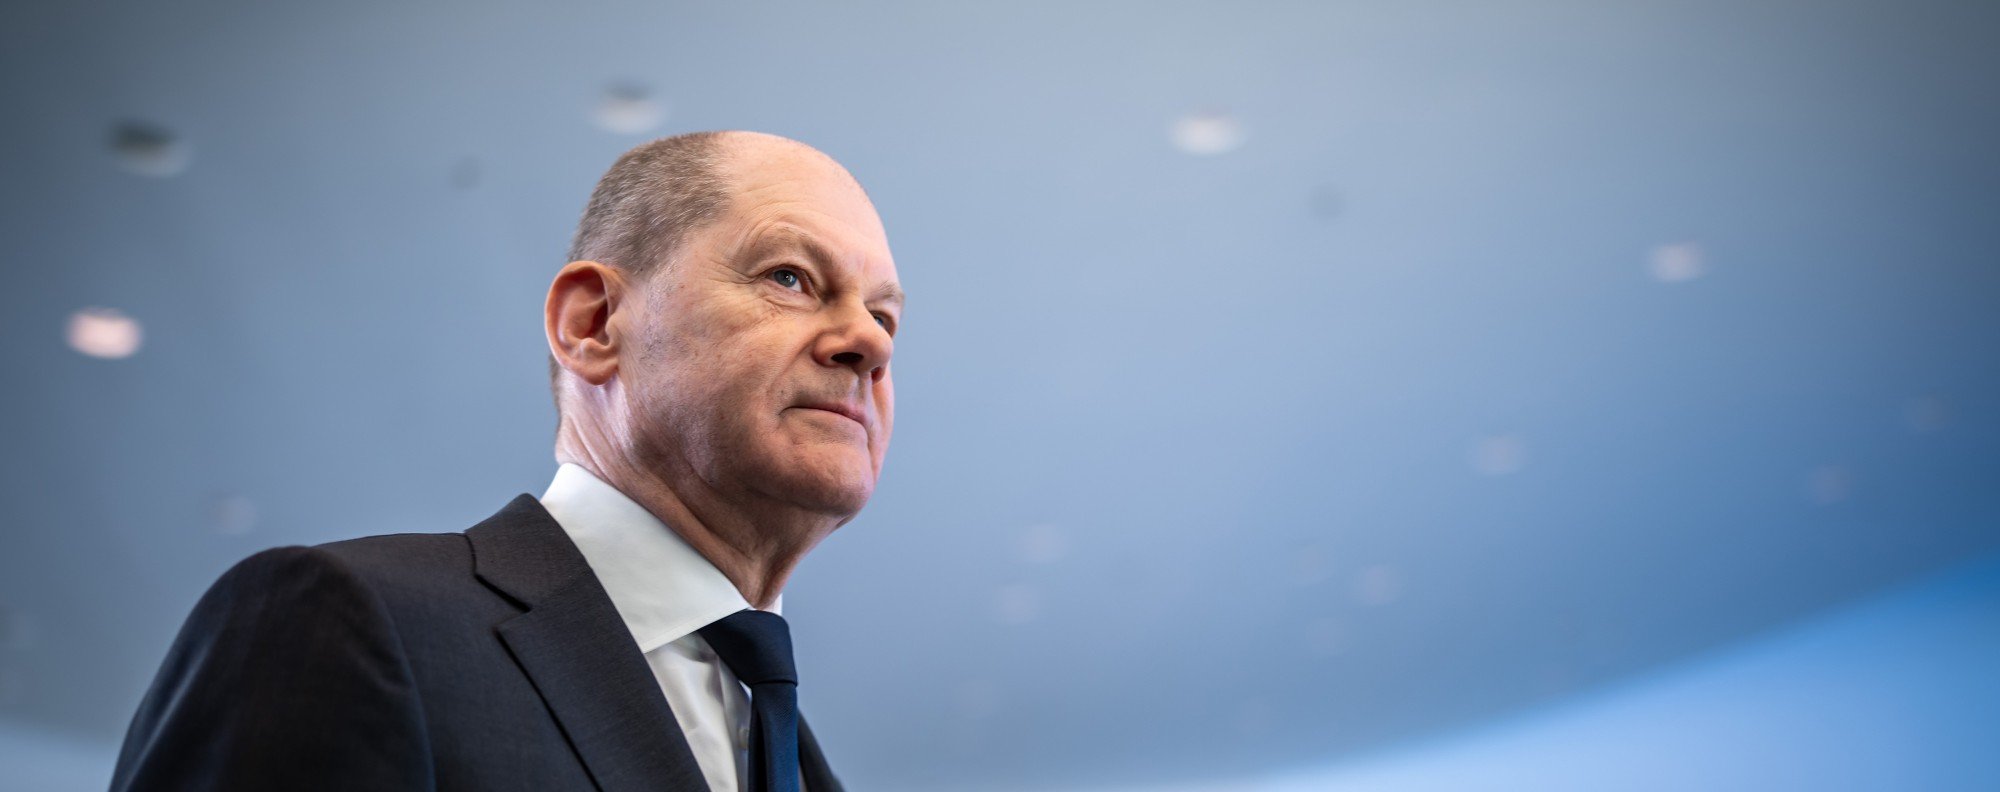 German Chancellor Olaf Scholz, arrives for a closed cabinet meeting at the Federal Chancellery in Berlin in January 2022. Photo: dpa/pool